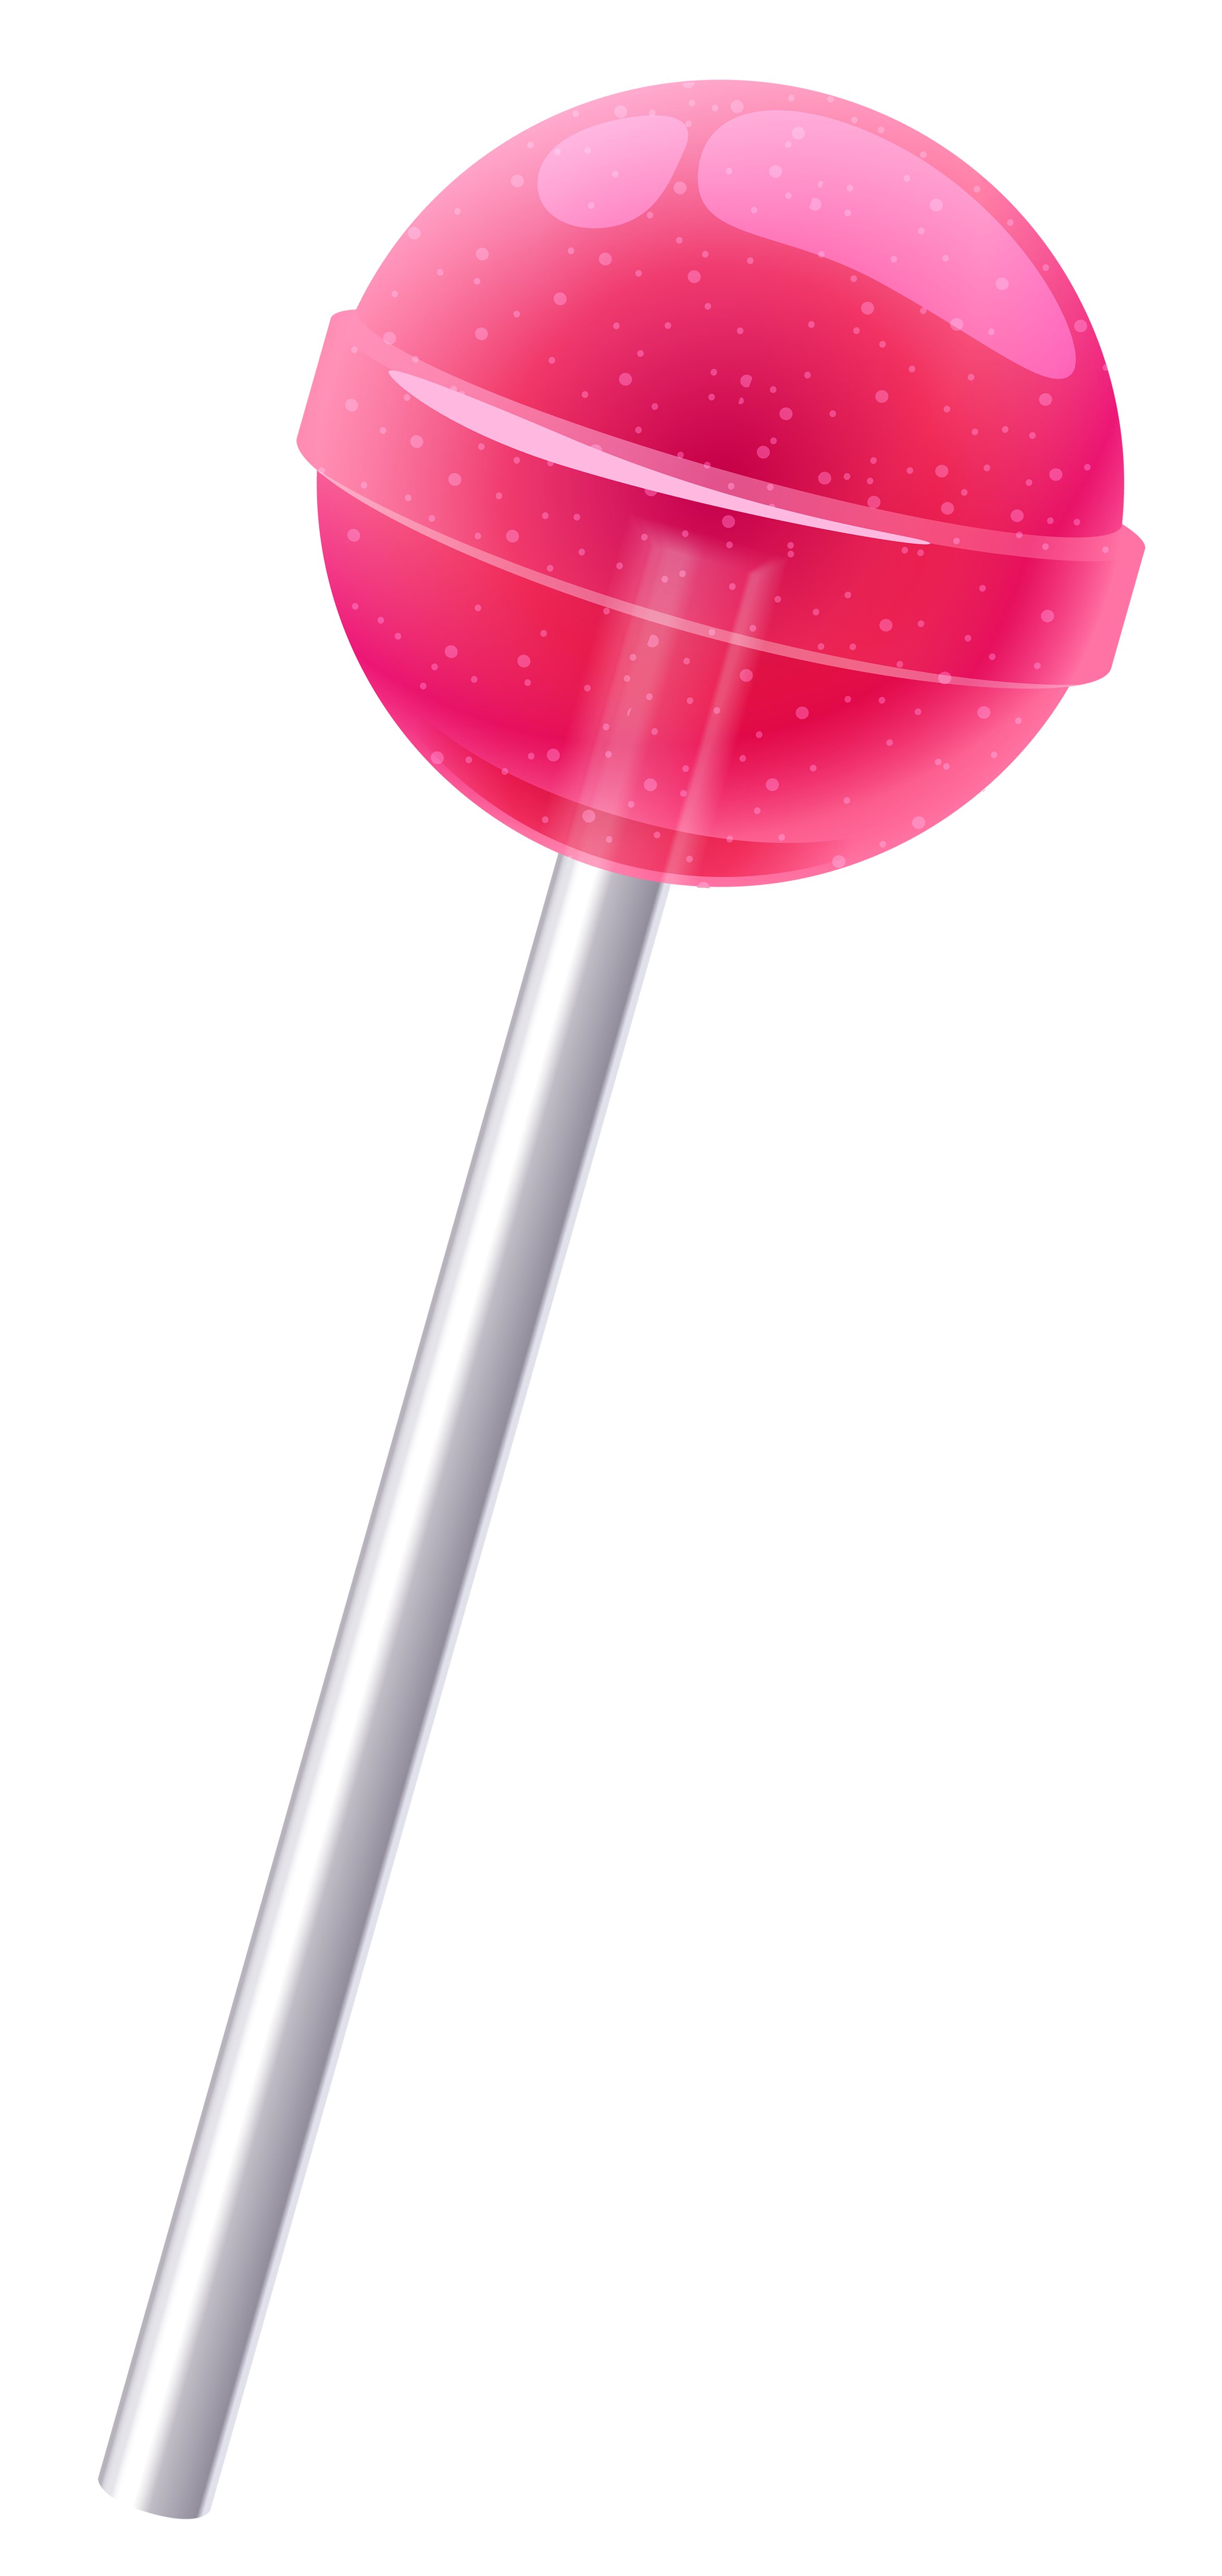 Melodious Lollipop Melodic Sweetheart Scented PNG